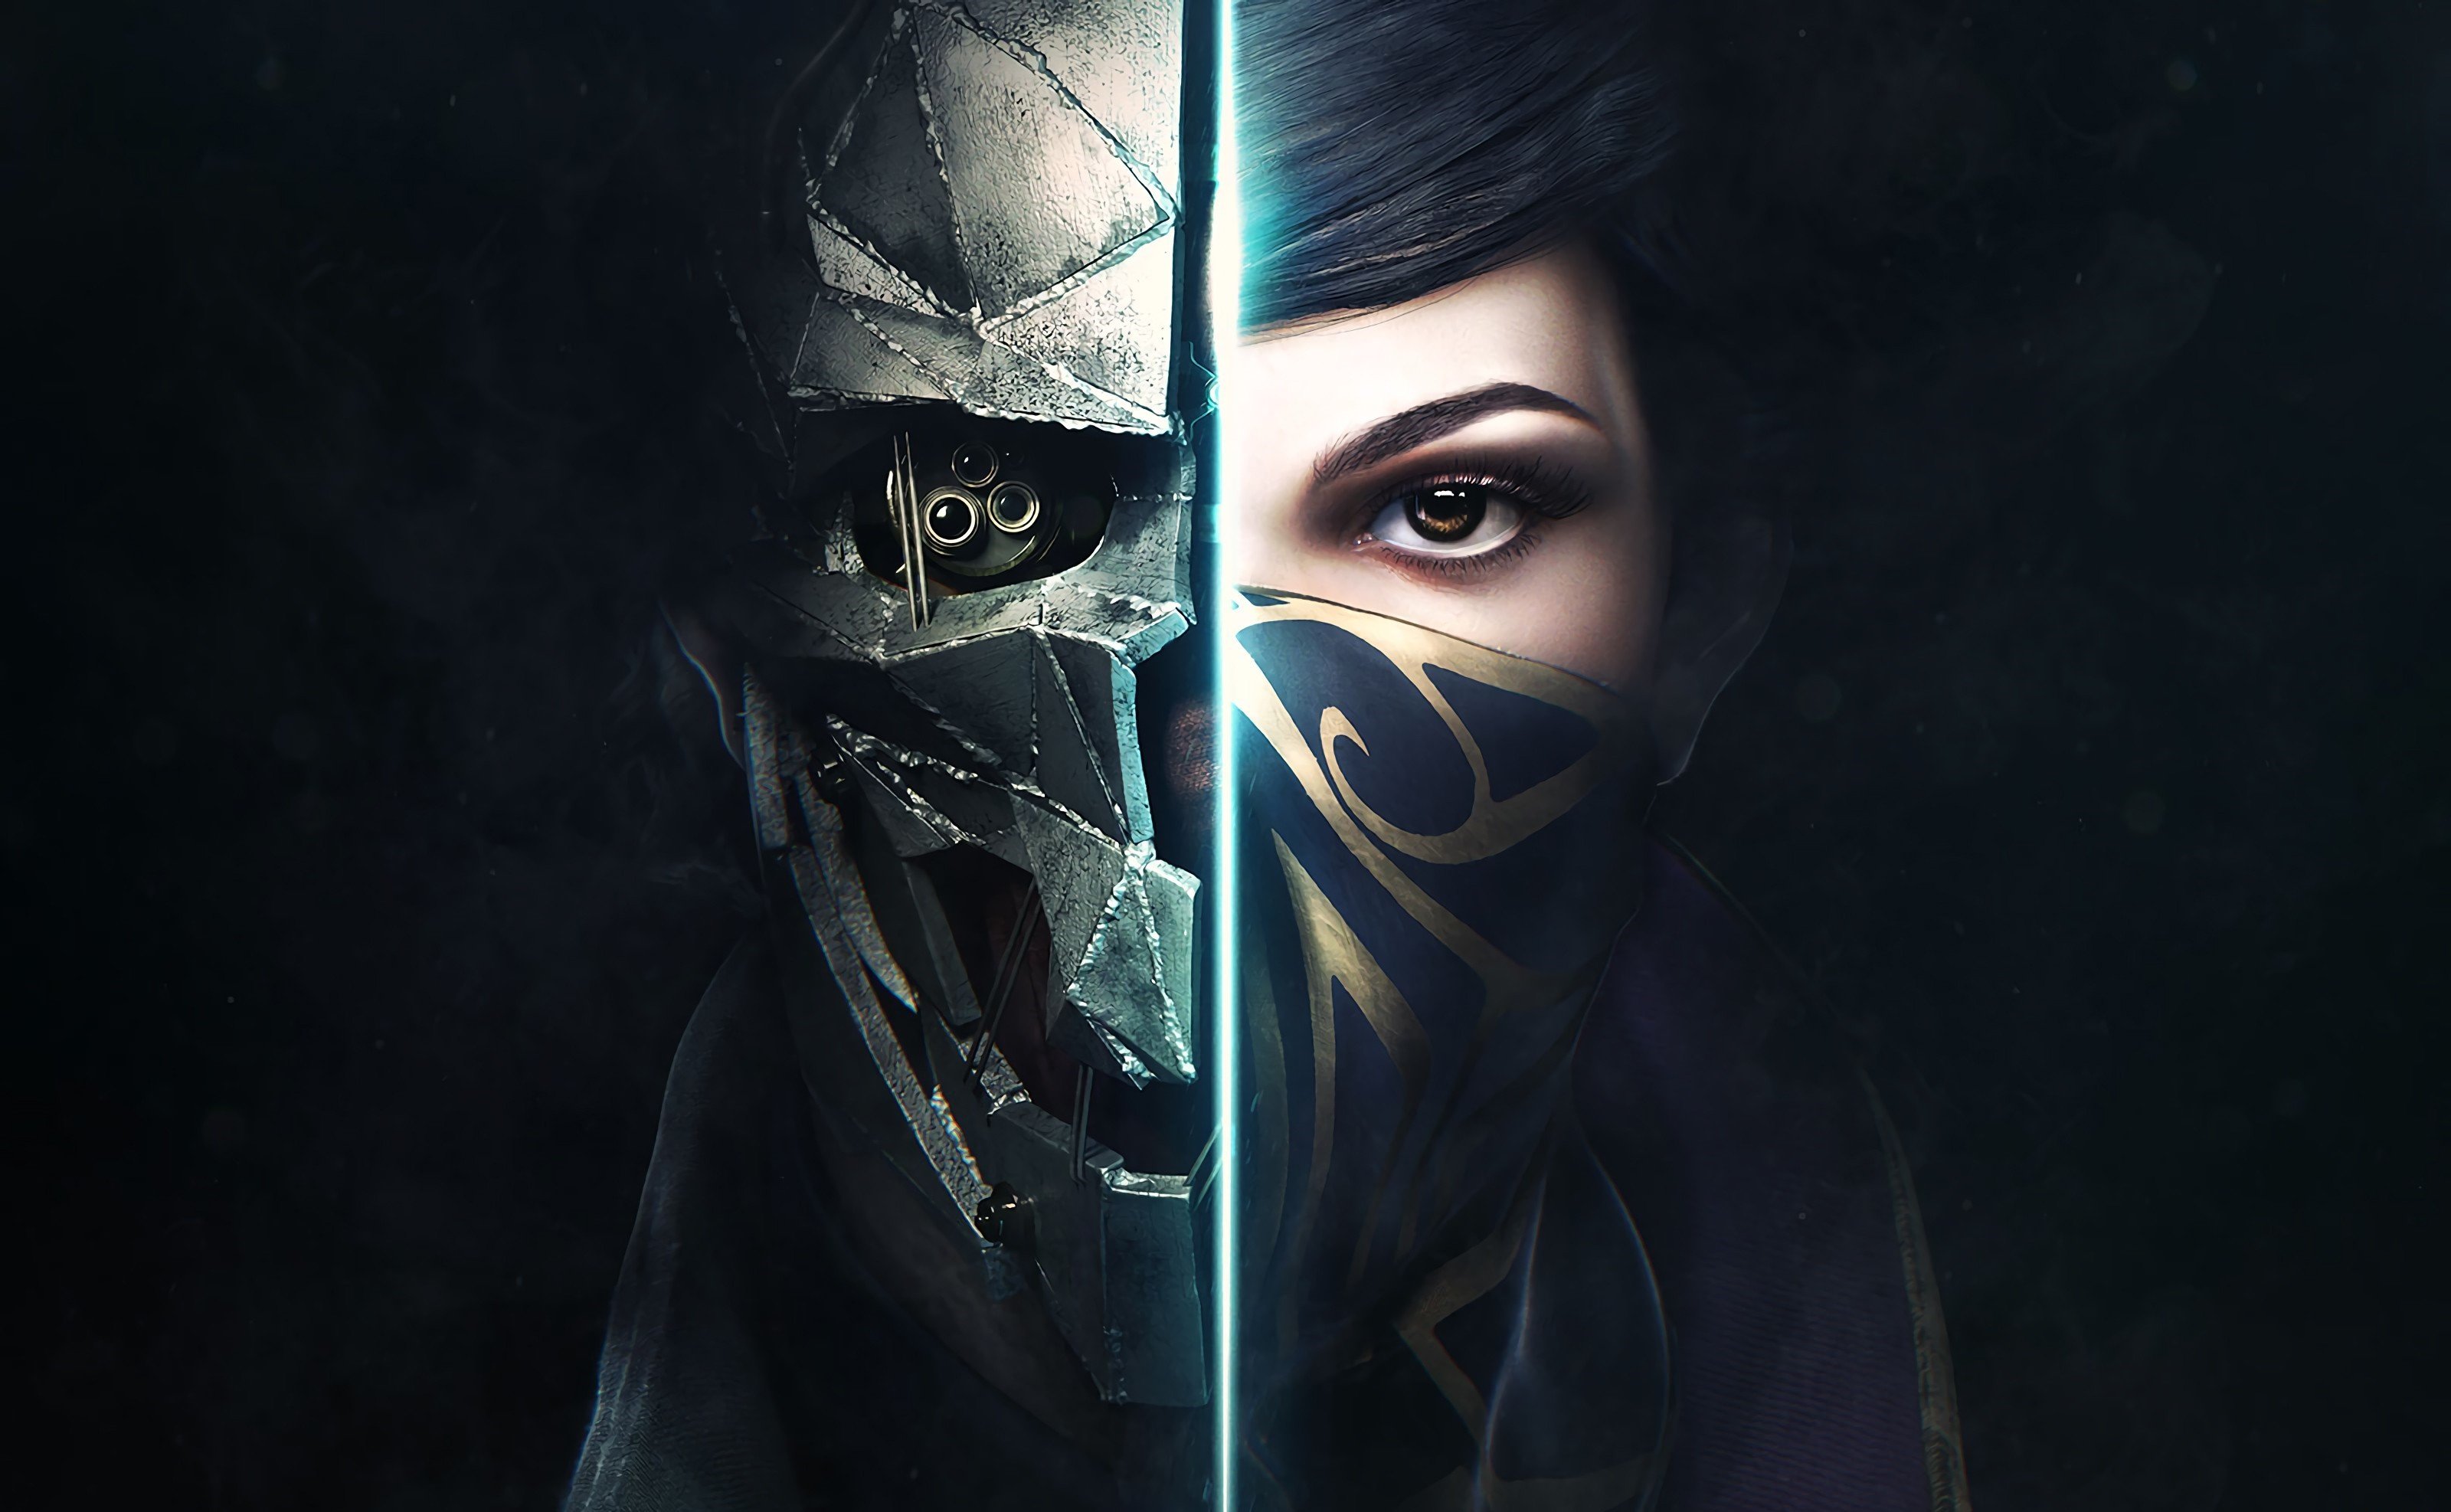 dishonored 2, Video games Wallpaper